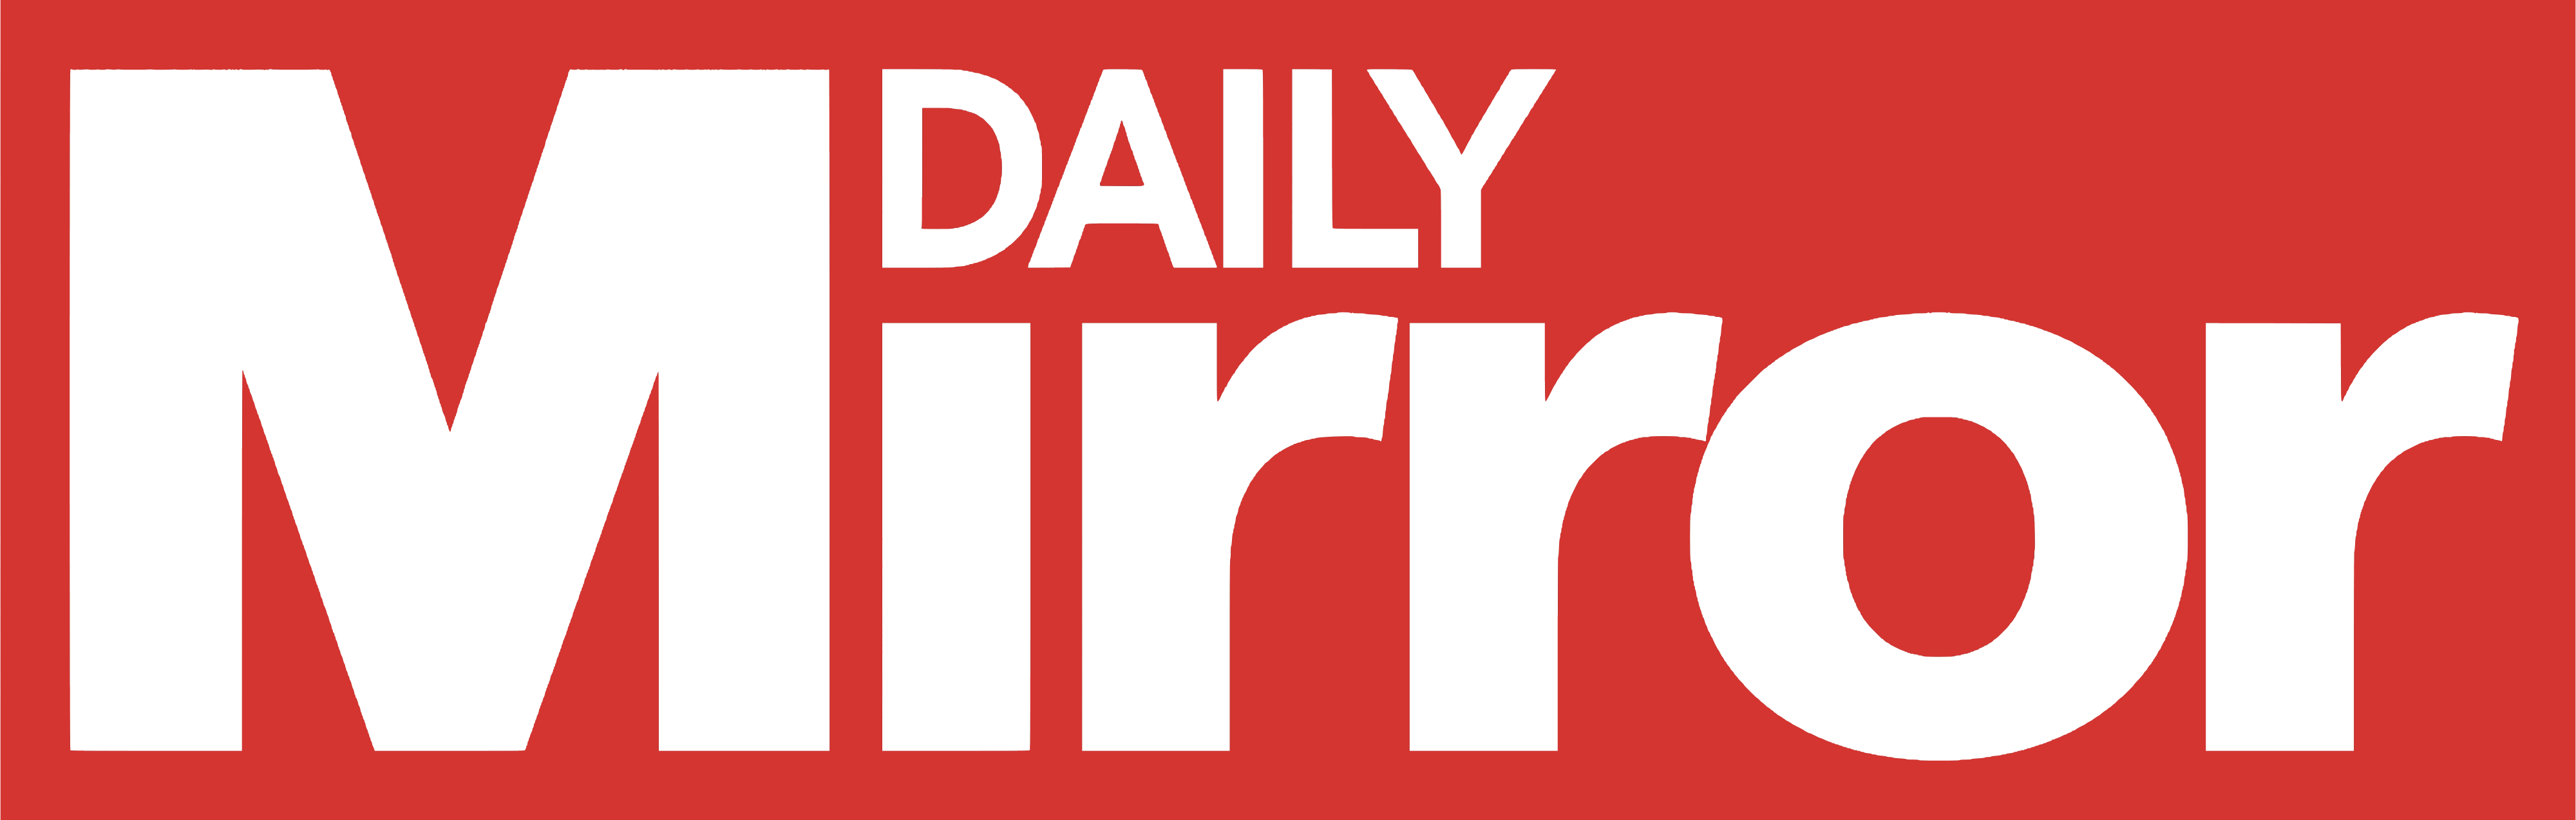 The Daily Mirror – Logos Download